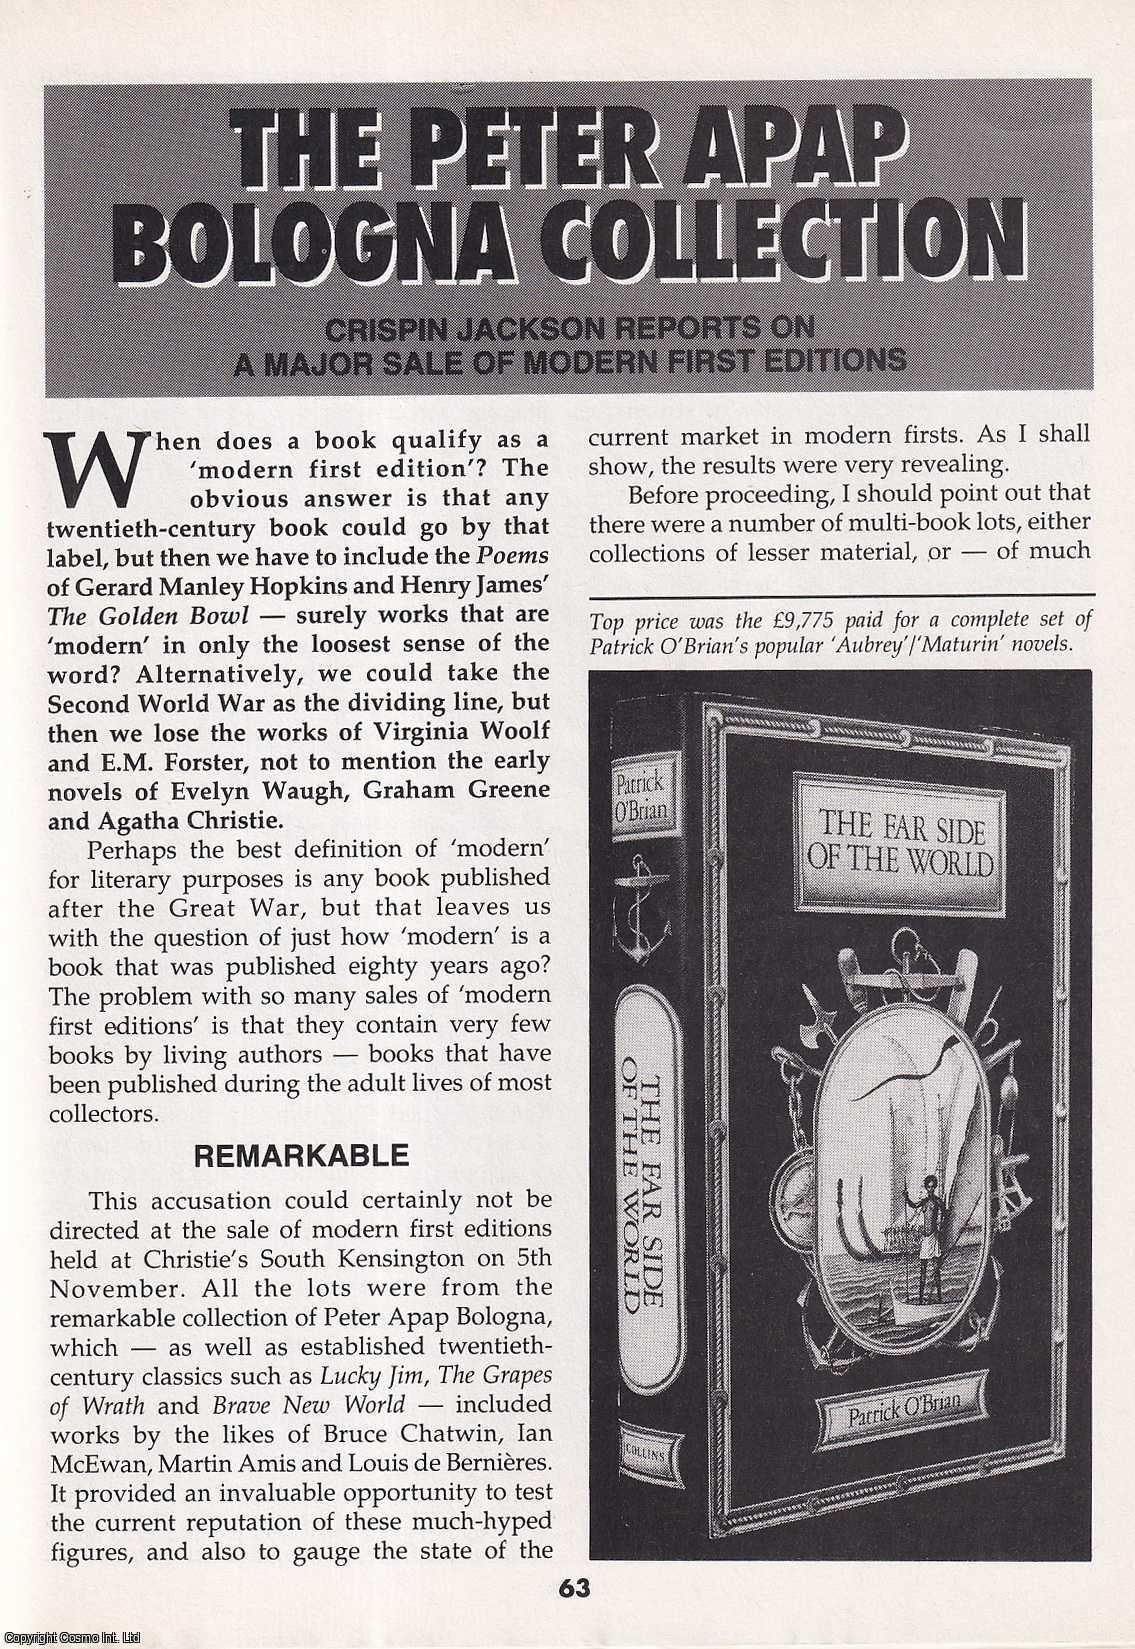 Crispin Jackson - The Peter Apap Bologna Collection. Reporting on a Major Sale of Modern First Editions. This is an original article separated from an issue of The Book & Magazine Collector publication.